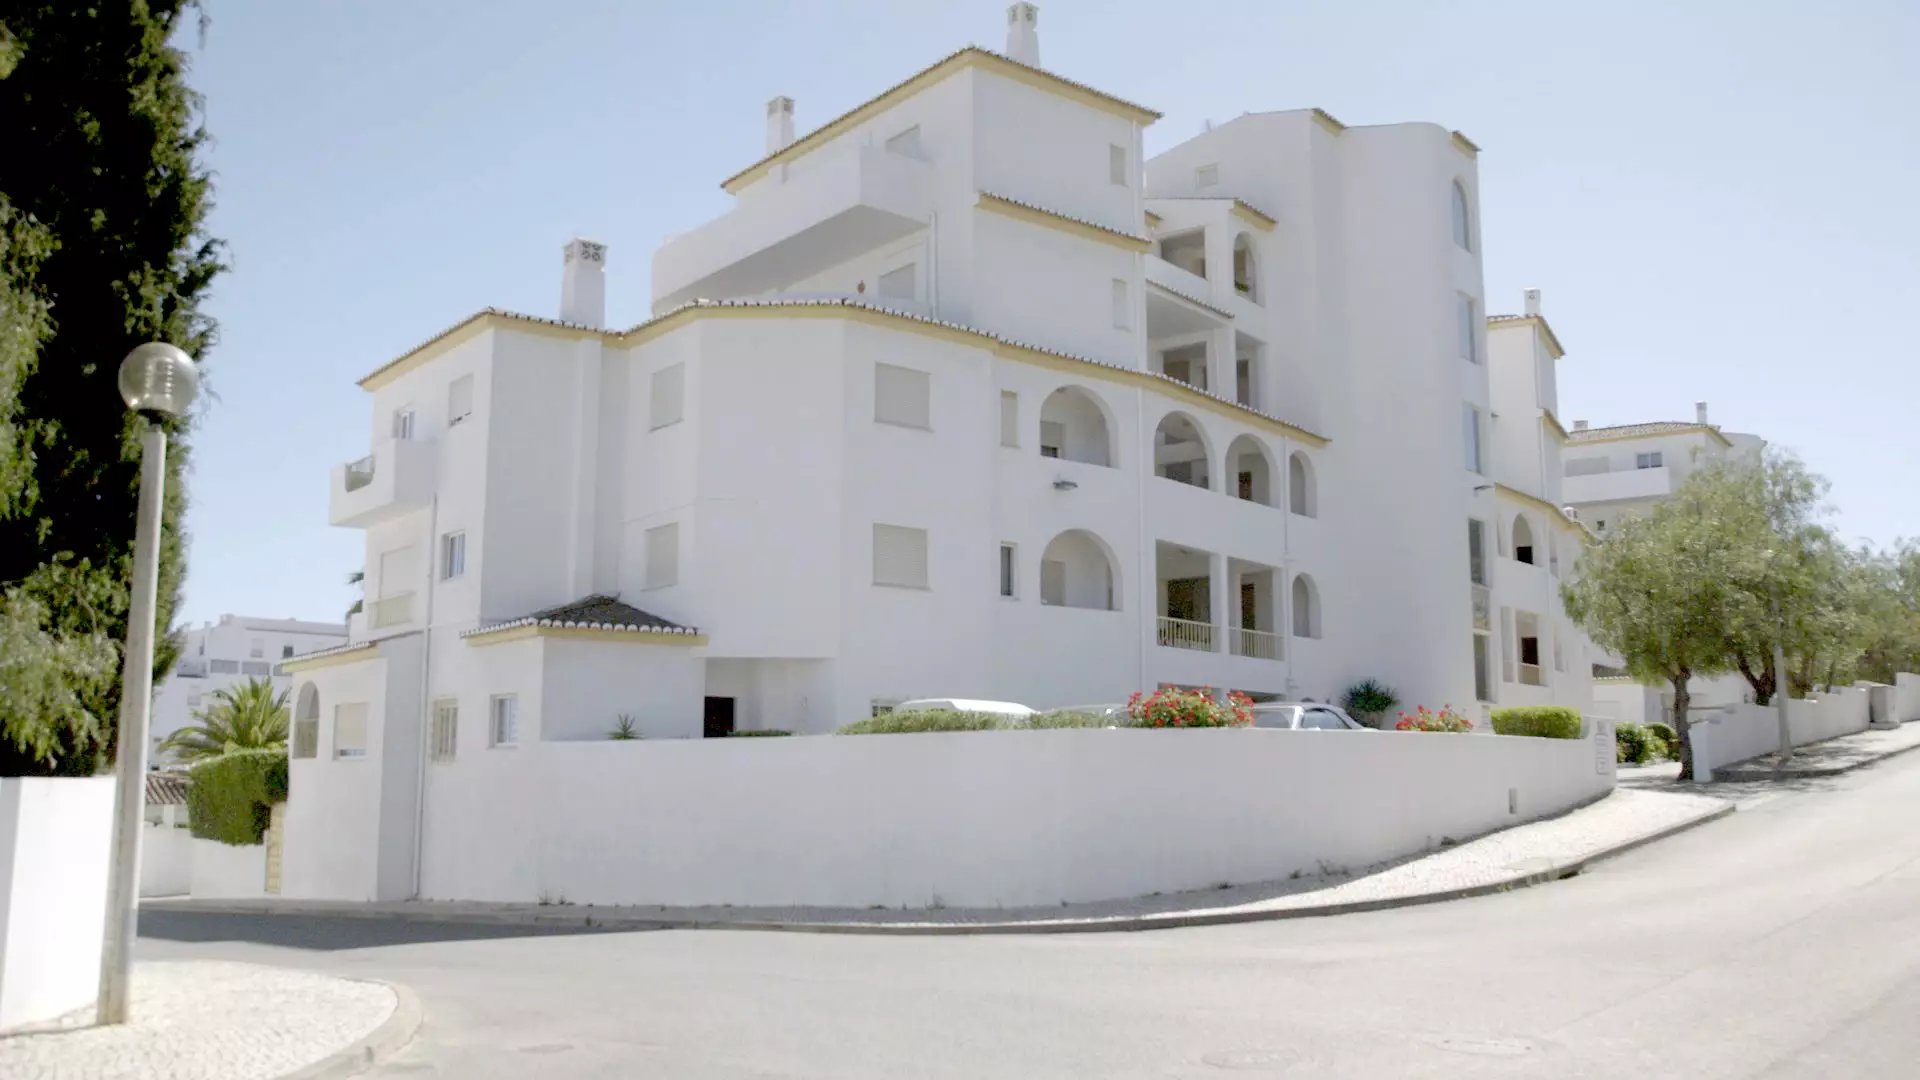 The property that Madeleine McCann disappeared from.